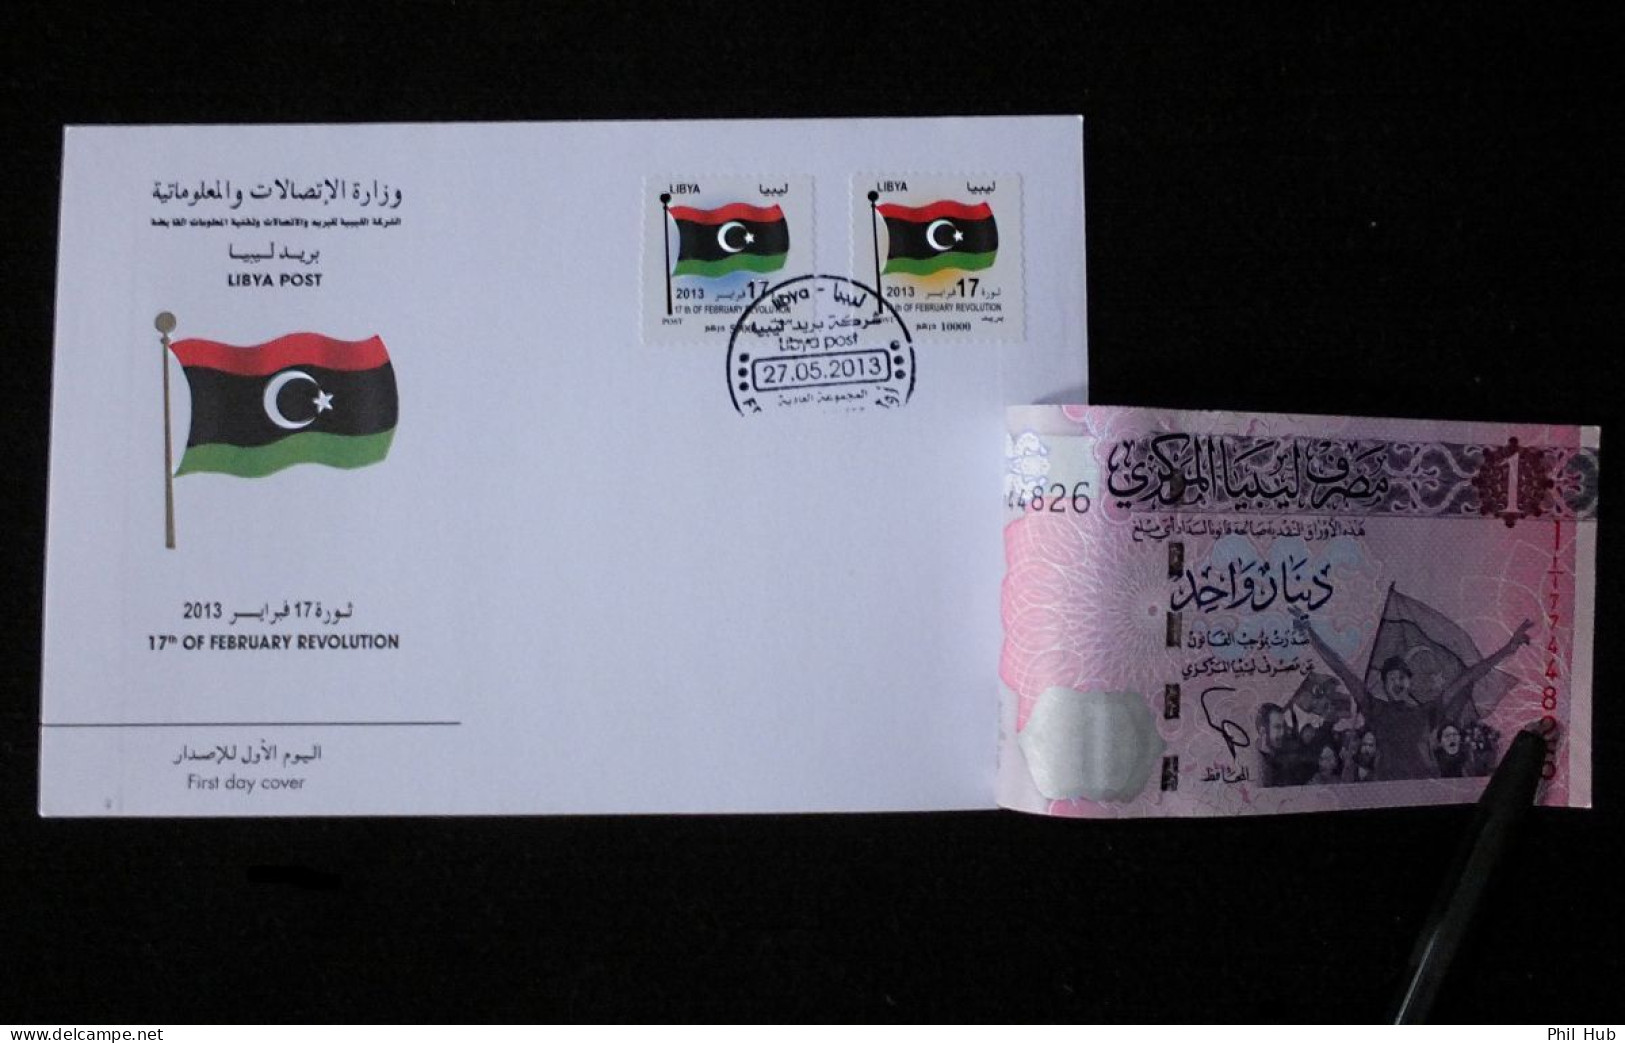 LIBYA 2013 "The Revolution FDC" NEW LIBYA FLAG STAMPS And BANKNOTE On FDC - Libya